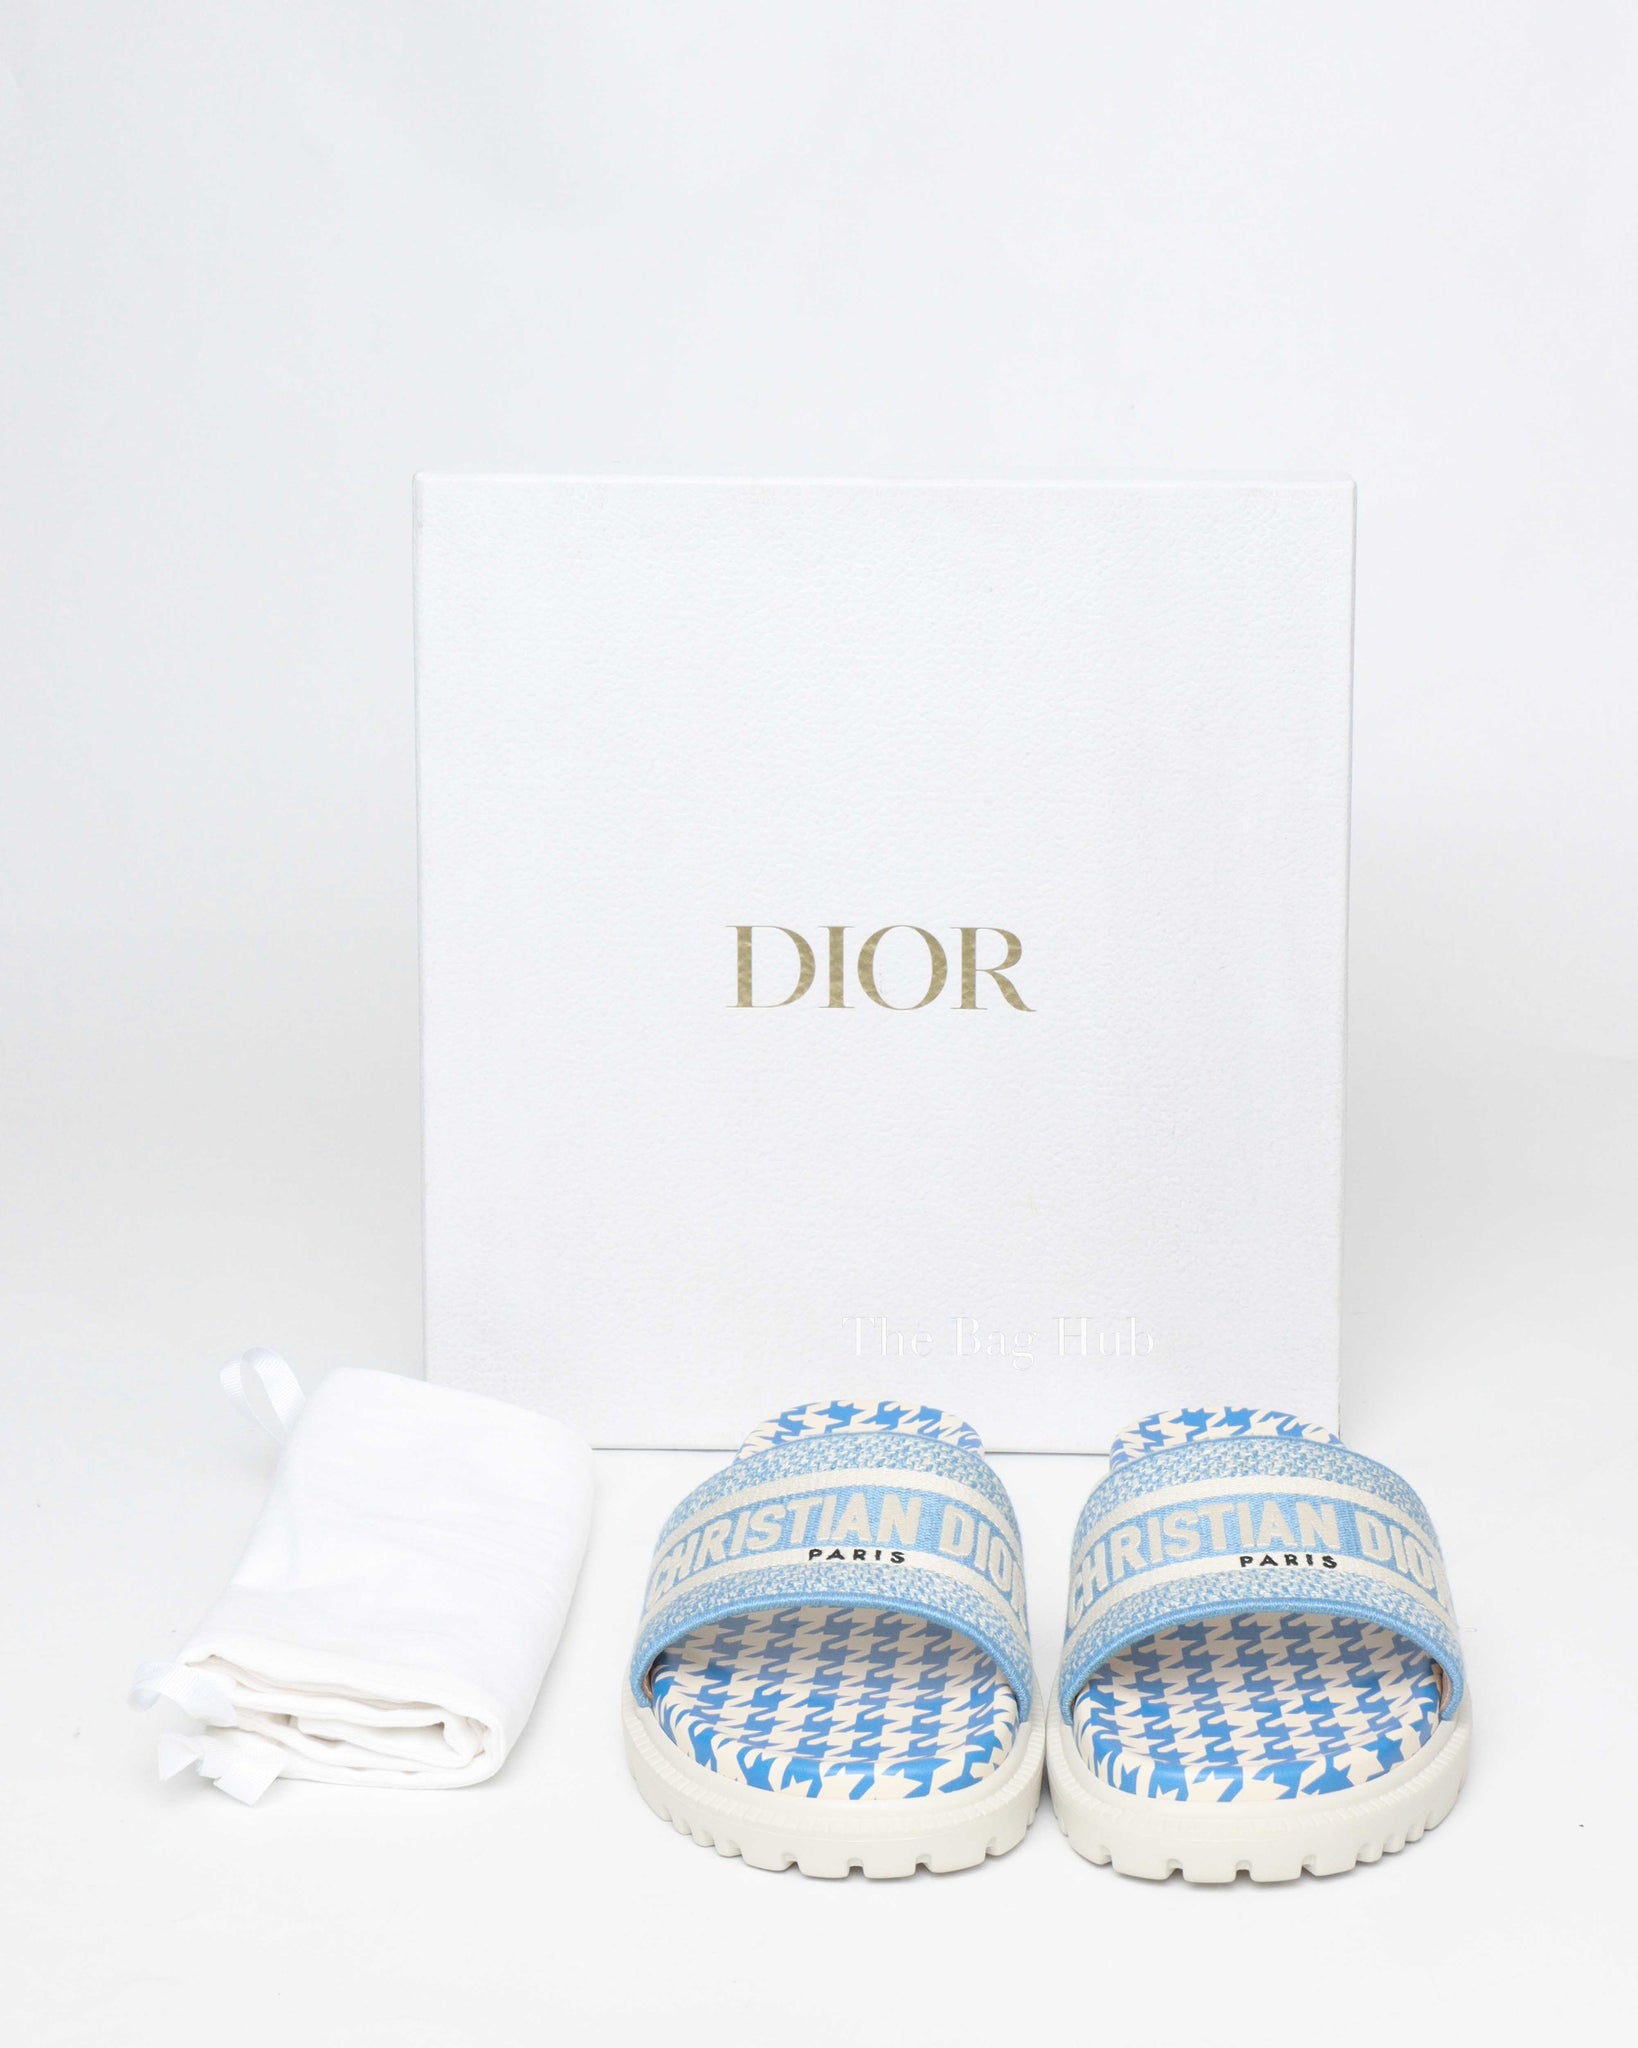 Christian Dior White/Blue Embroidered Canvas D'Way Sandals Size 40-9